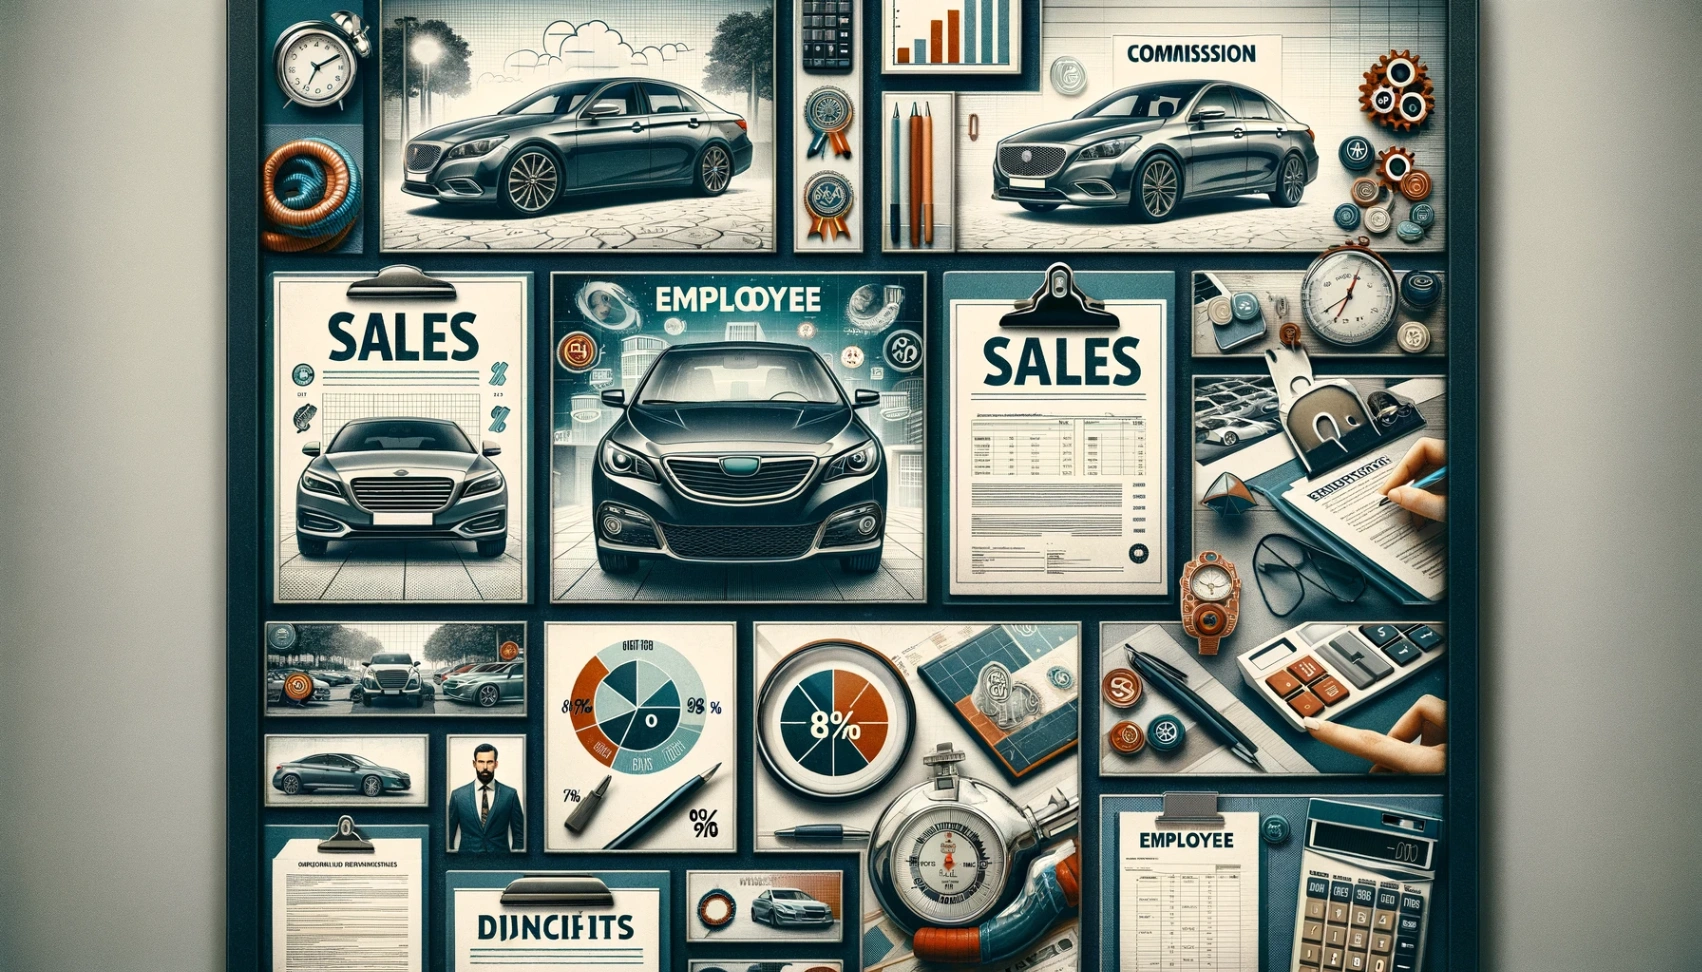 Automobile Sales Roles: 15% Employee Discount and Competitive Commissions for All Levels